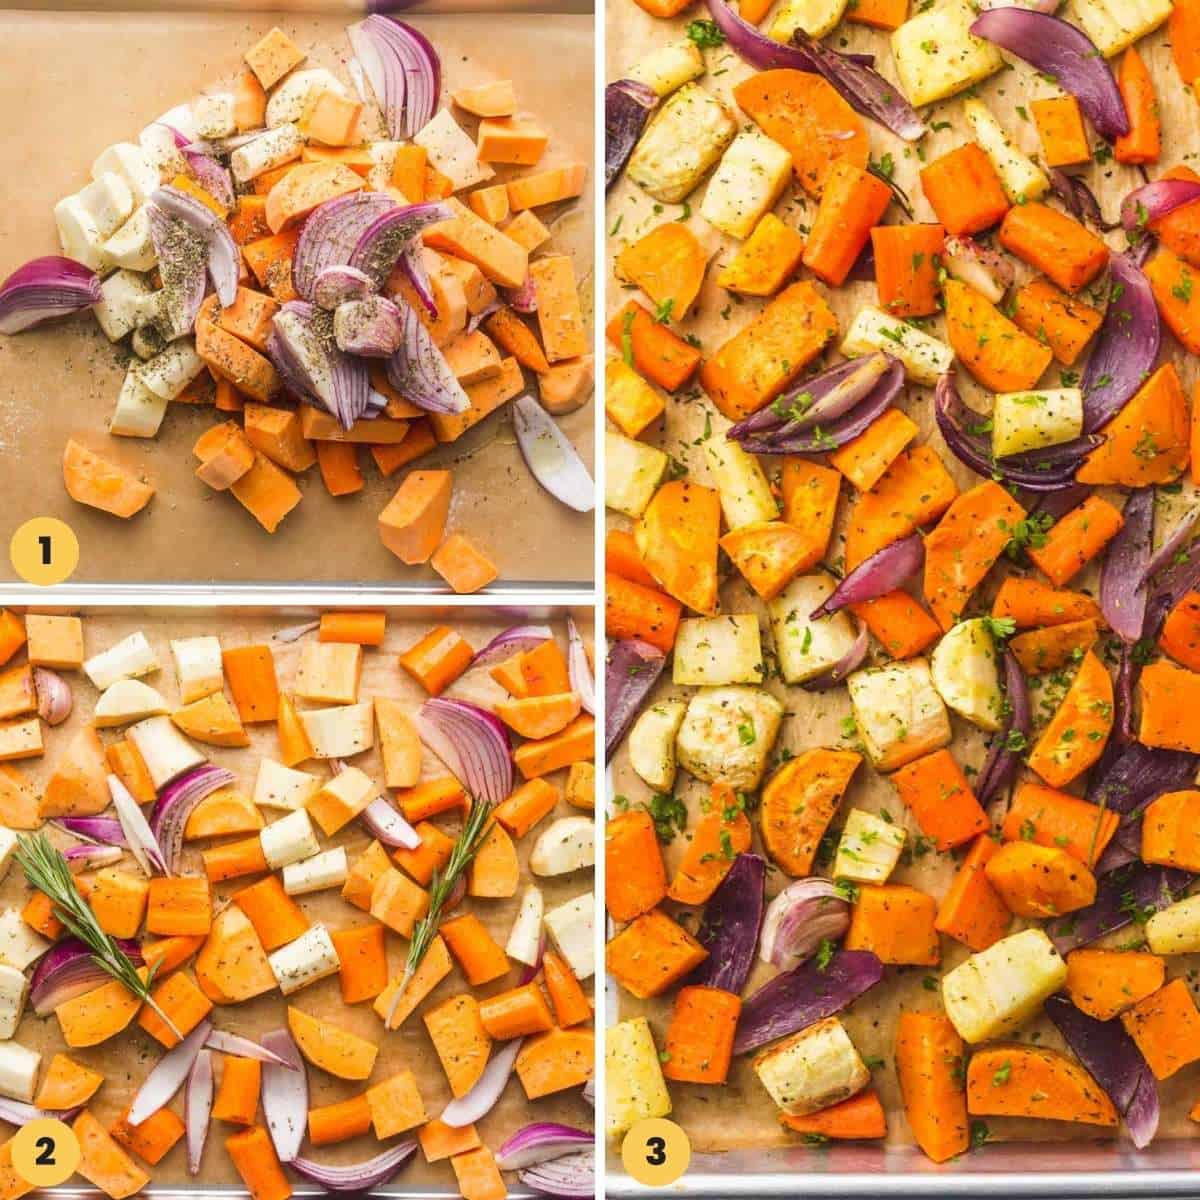 Collage of three images showing how to roast root vegetables